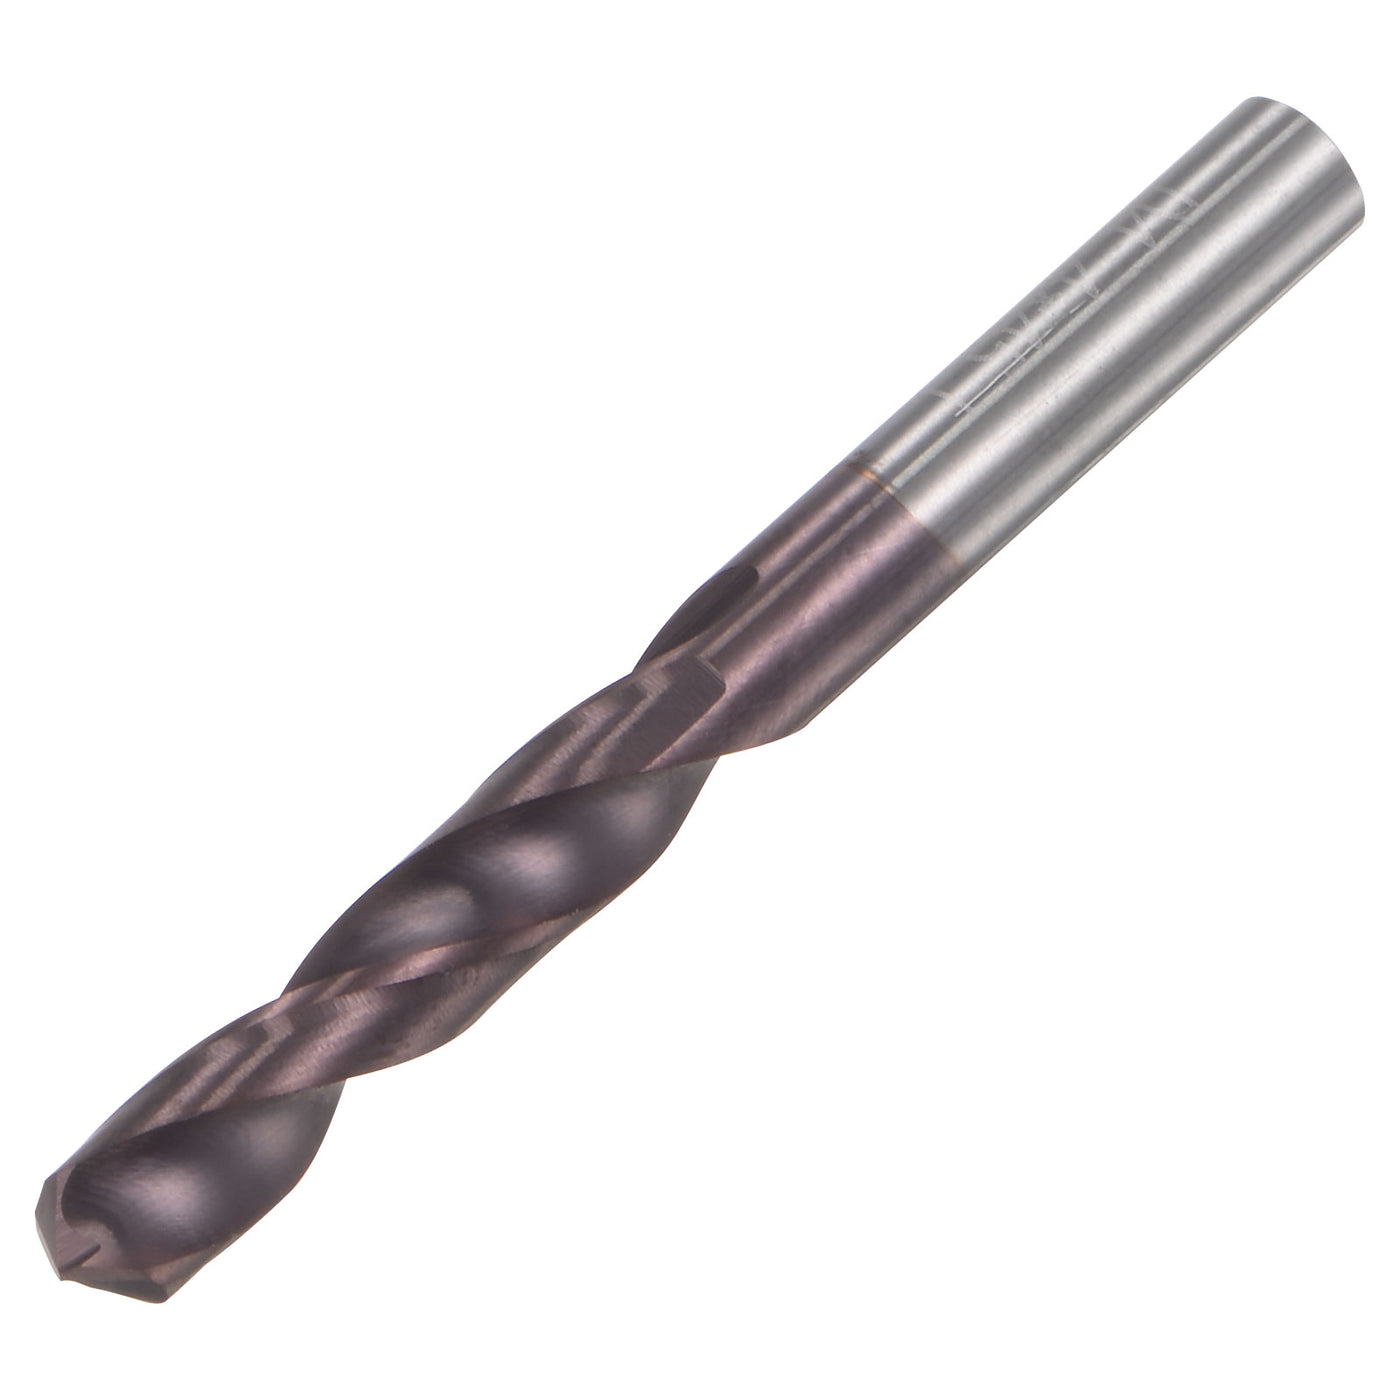 uxcell Uxcell 4.4mm DIN K45 Tungsten Carbide AlTiSin Coated Drill Bit for Stainless Steel